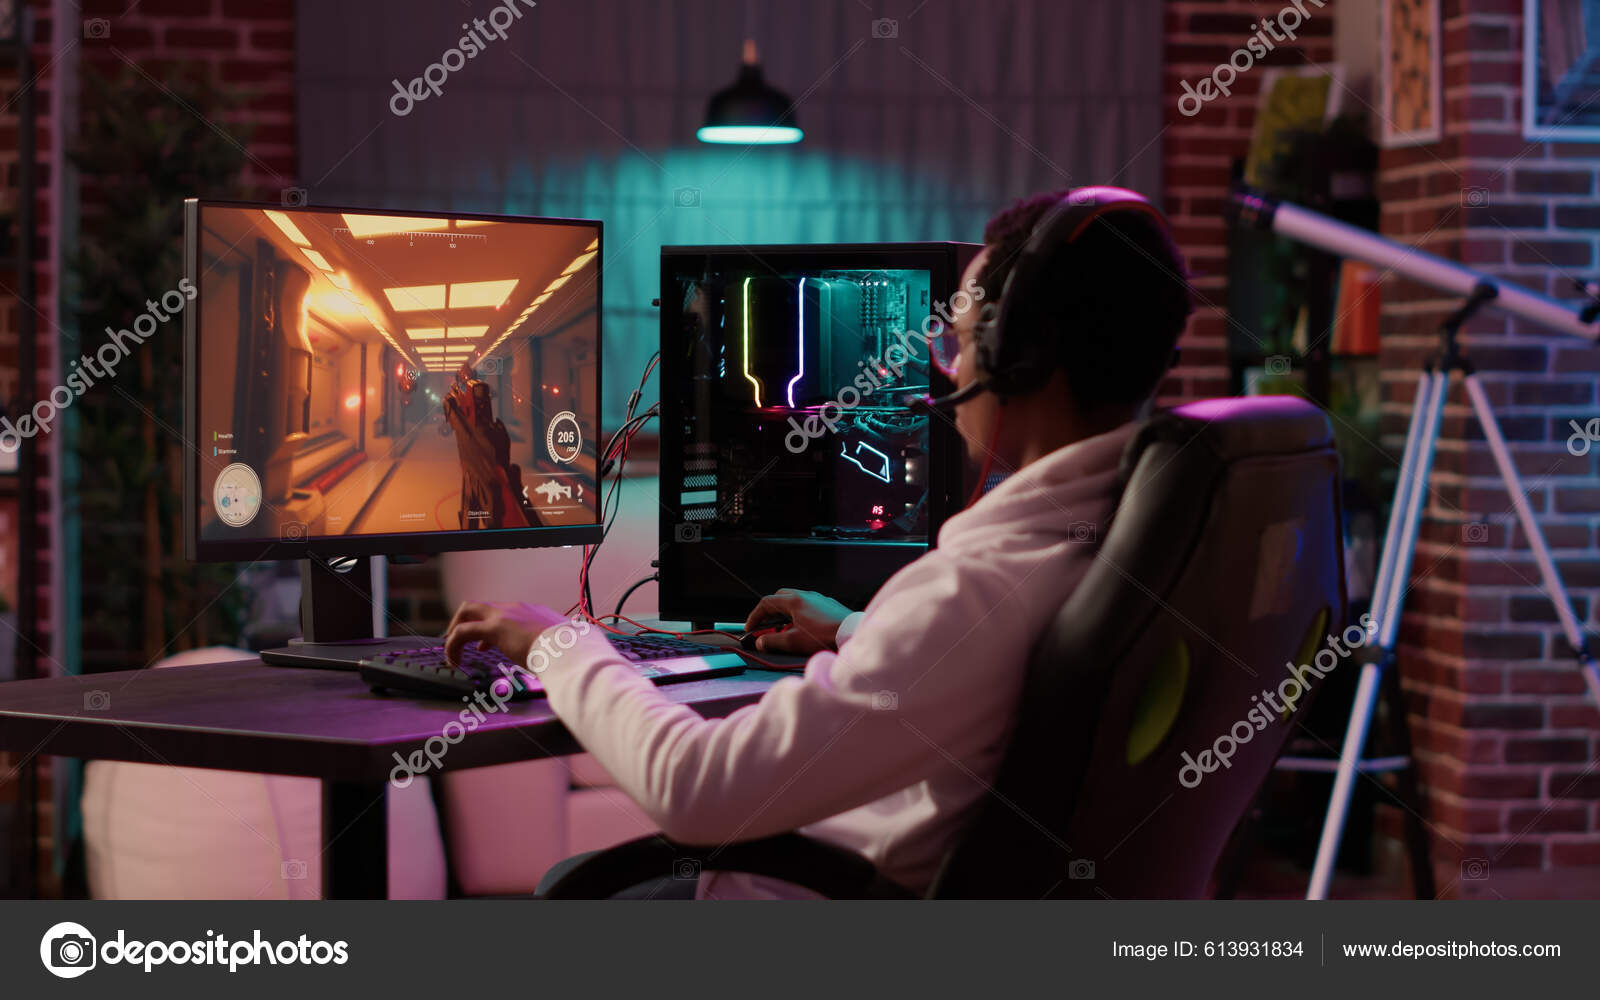 Free Photo  Gamer using controller to play online video games on computer.  man playing game with joystick and headphones in front of monitor. player  having gaming equipment, doing fun activity.